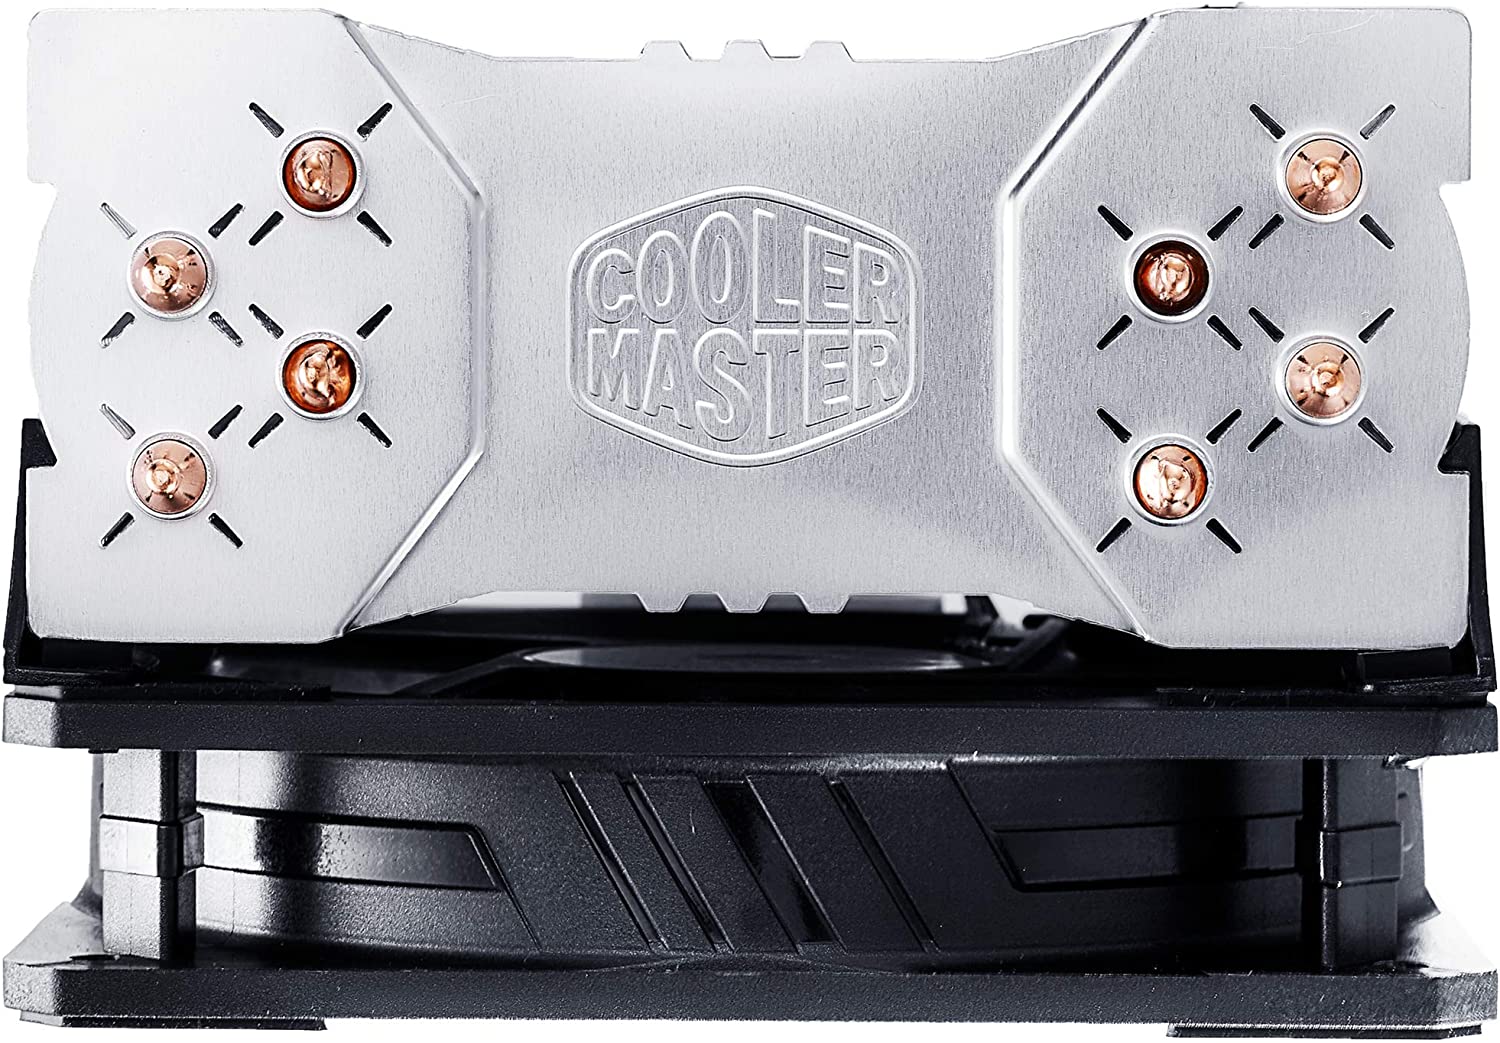 Cooler Master Hyper 212 EVO V2 CPU Air Cooler with SickleFlow 120, PWM Fan, Direct Contact Technology, 4 Copper Heat Pipes for AMD Ryzen/Intel LGA1700/1200/1151, RR-2V2E-18PK-R2